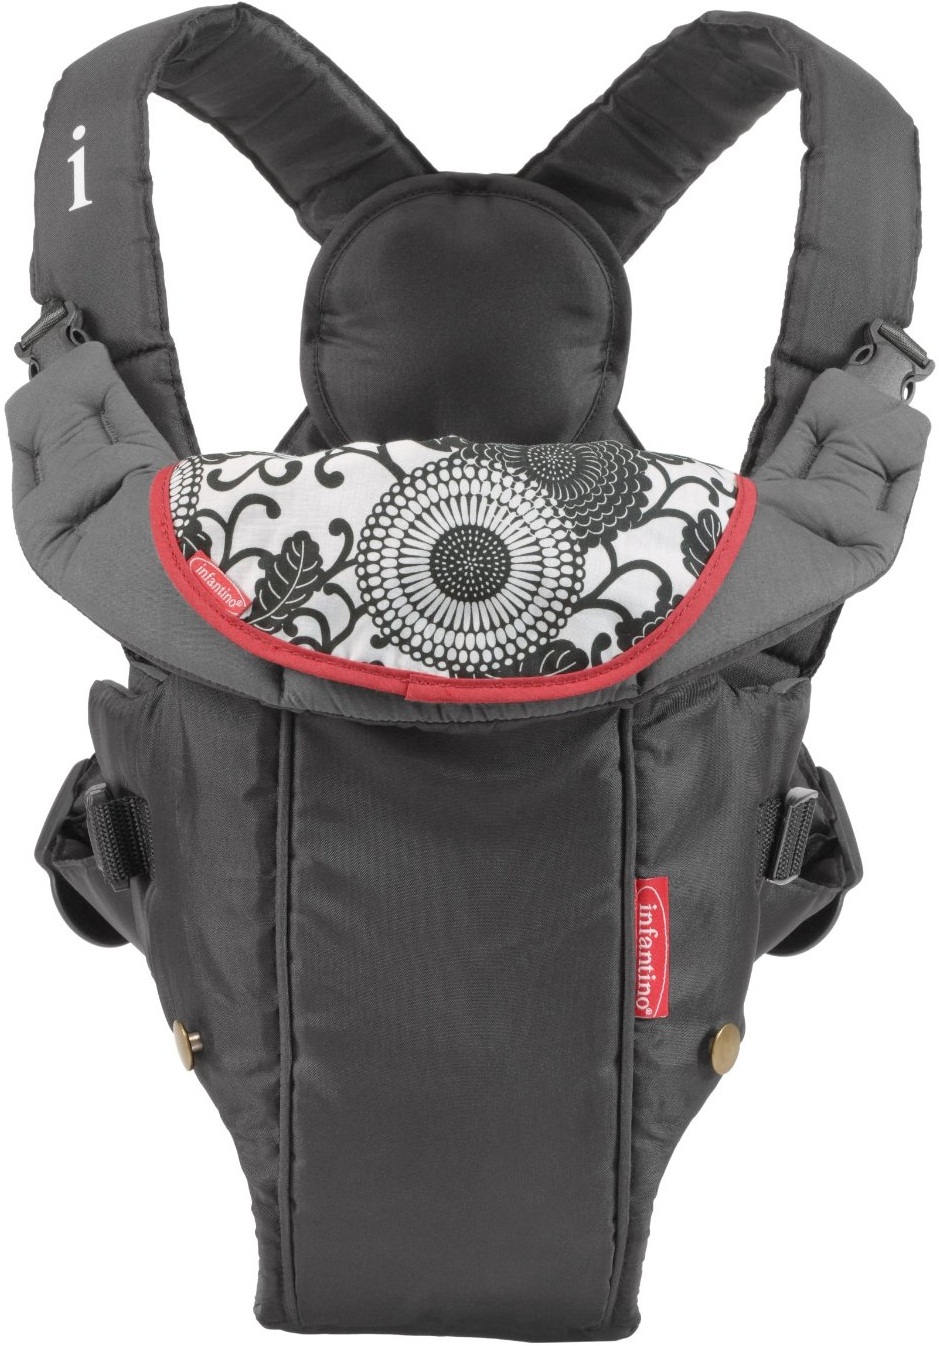 infantino swift baby carrier reviews